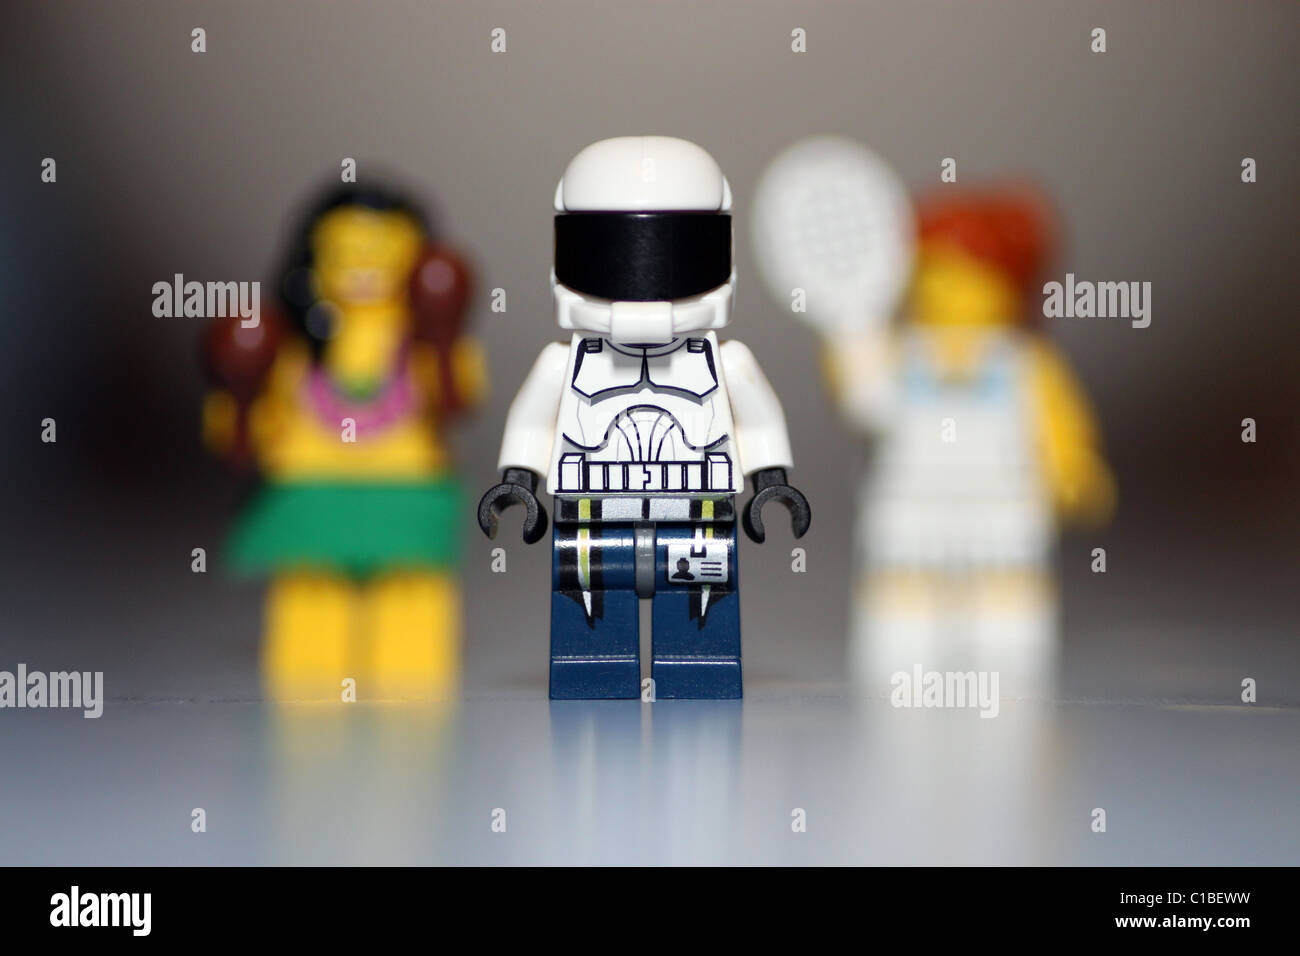 Lego man with two lego ladies behind him Stock Photo